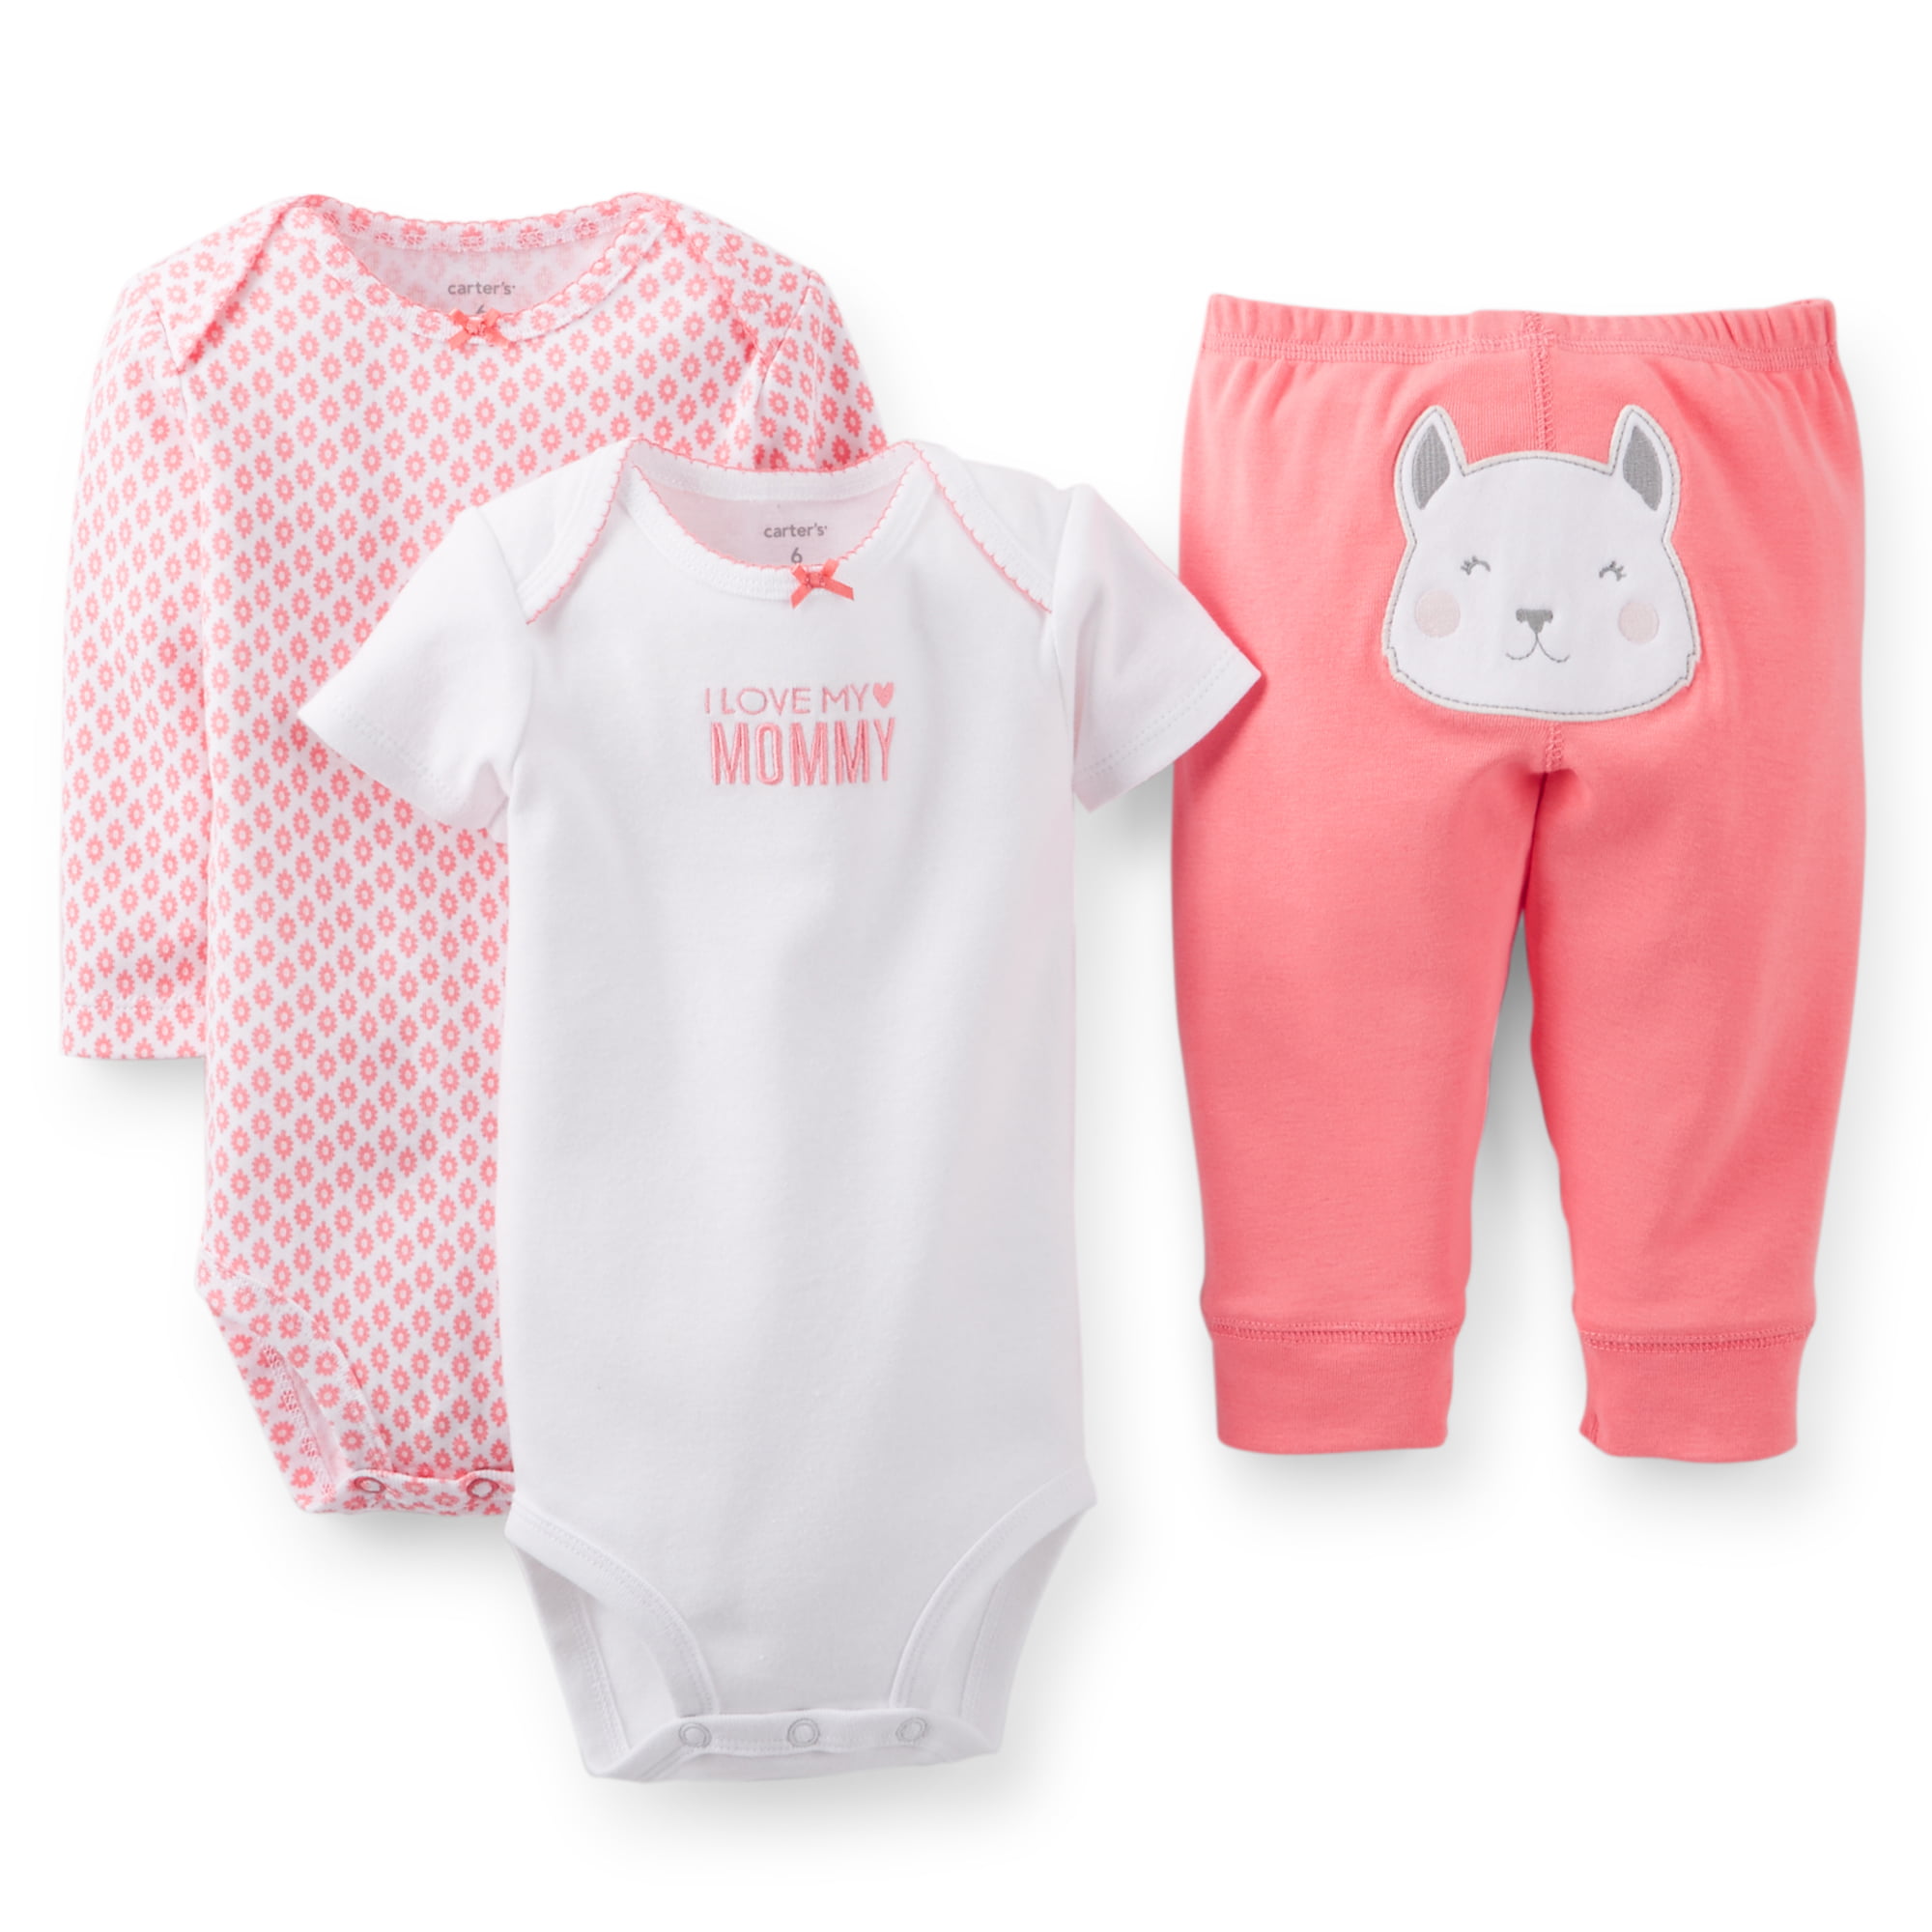 Carter's Carters Baby Clothing Outfit Girls 3piece pants set I Love My Mommy